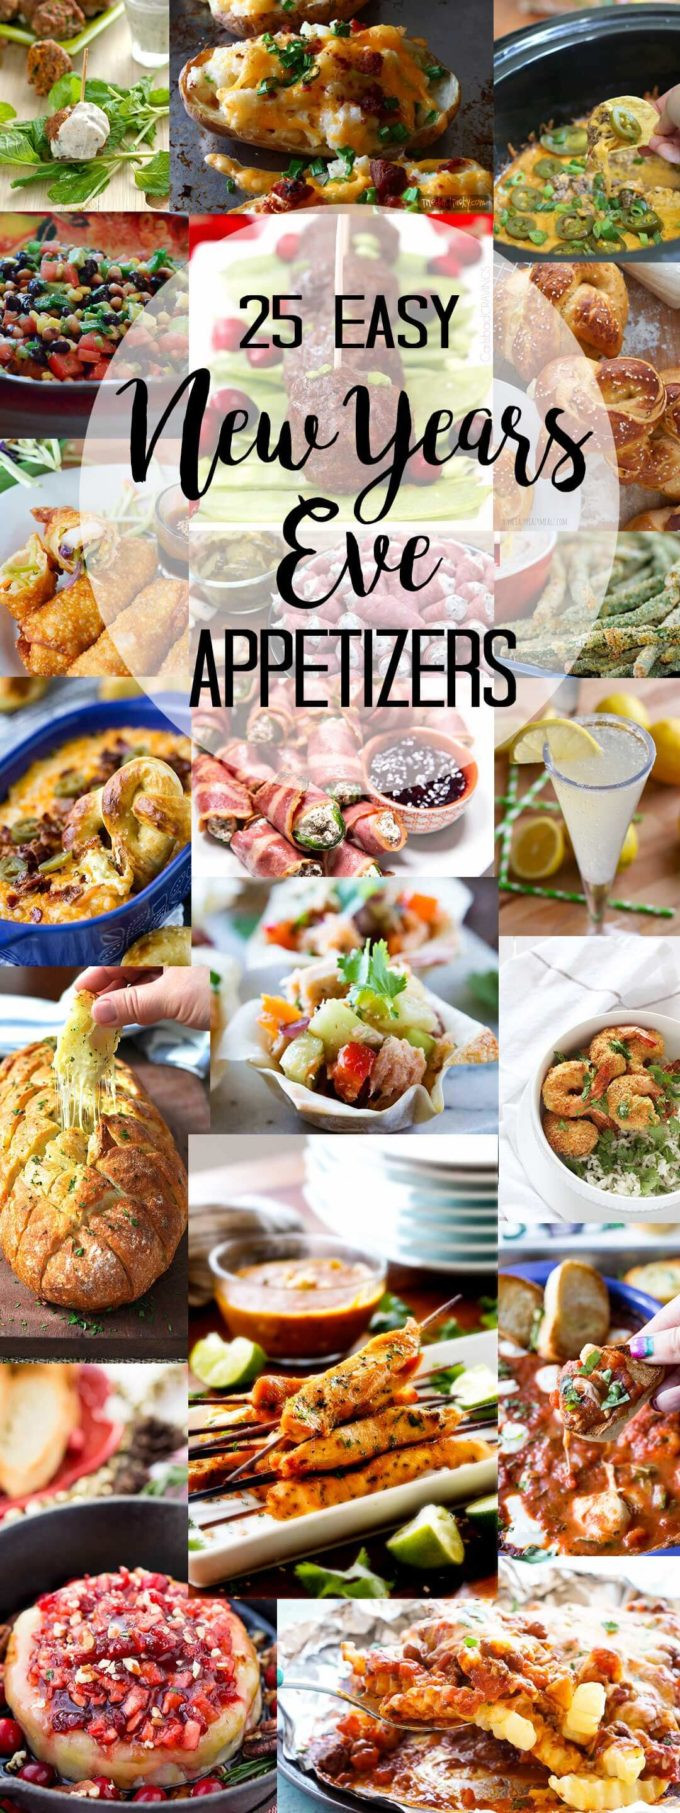 Easy Appetizers New Years Eve
 25 New Year s Eve Appetizers Easy Peasy Meals